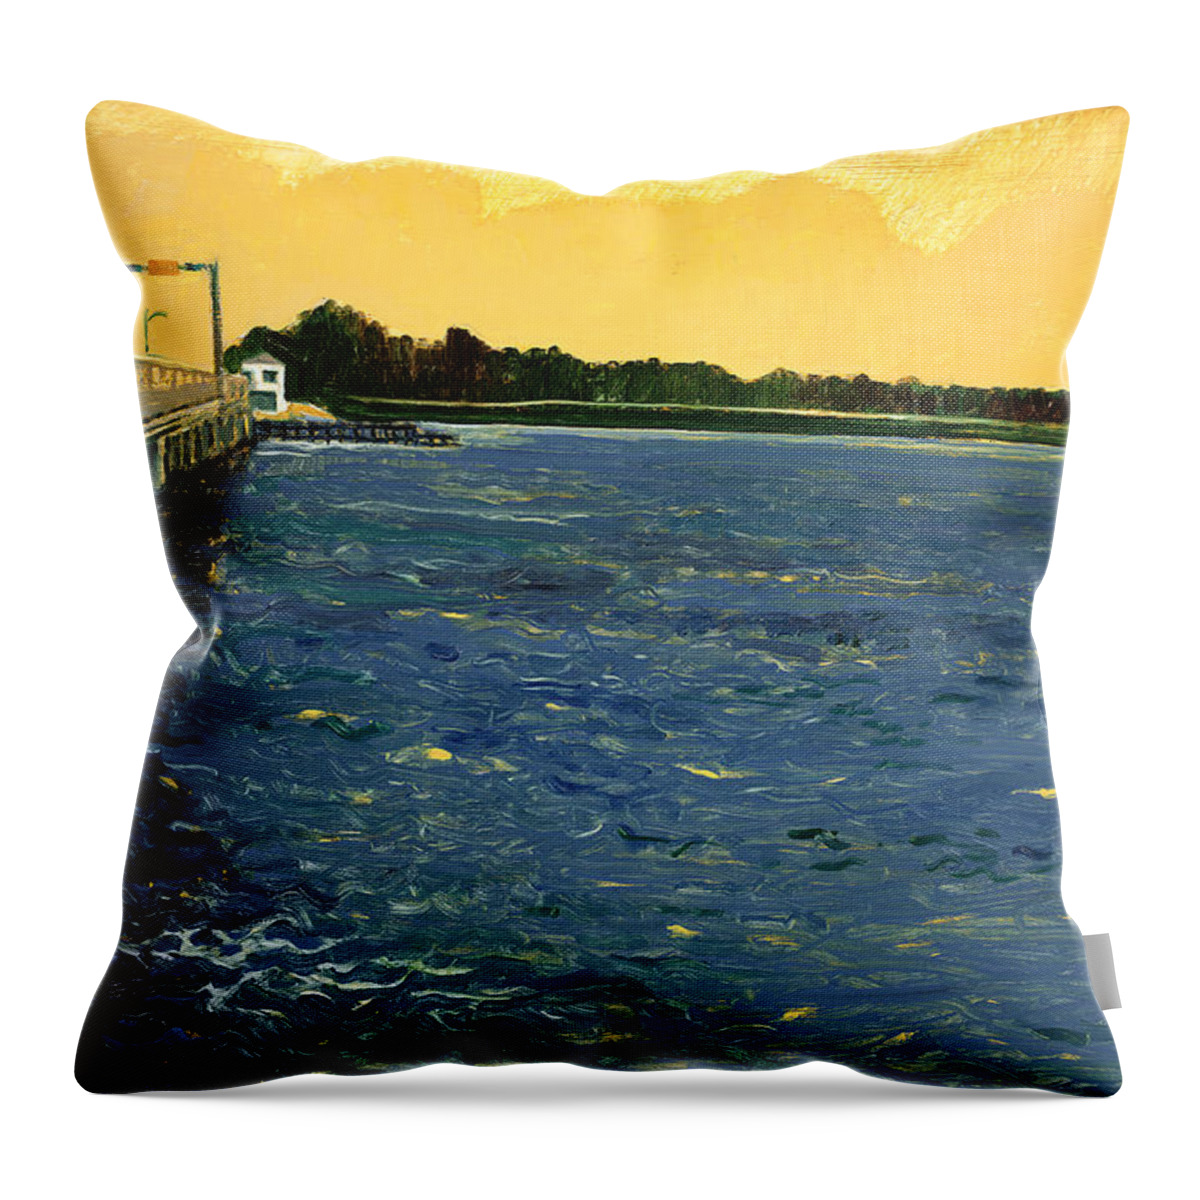 Landscape Throw Pillow featuring the painting South Bridge by Thomas Tribby